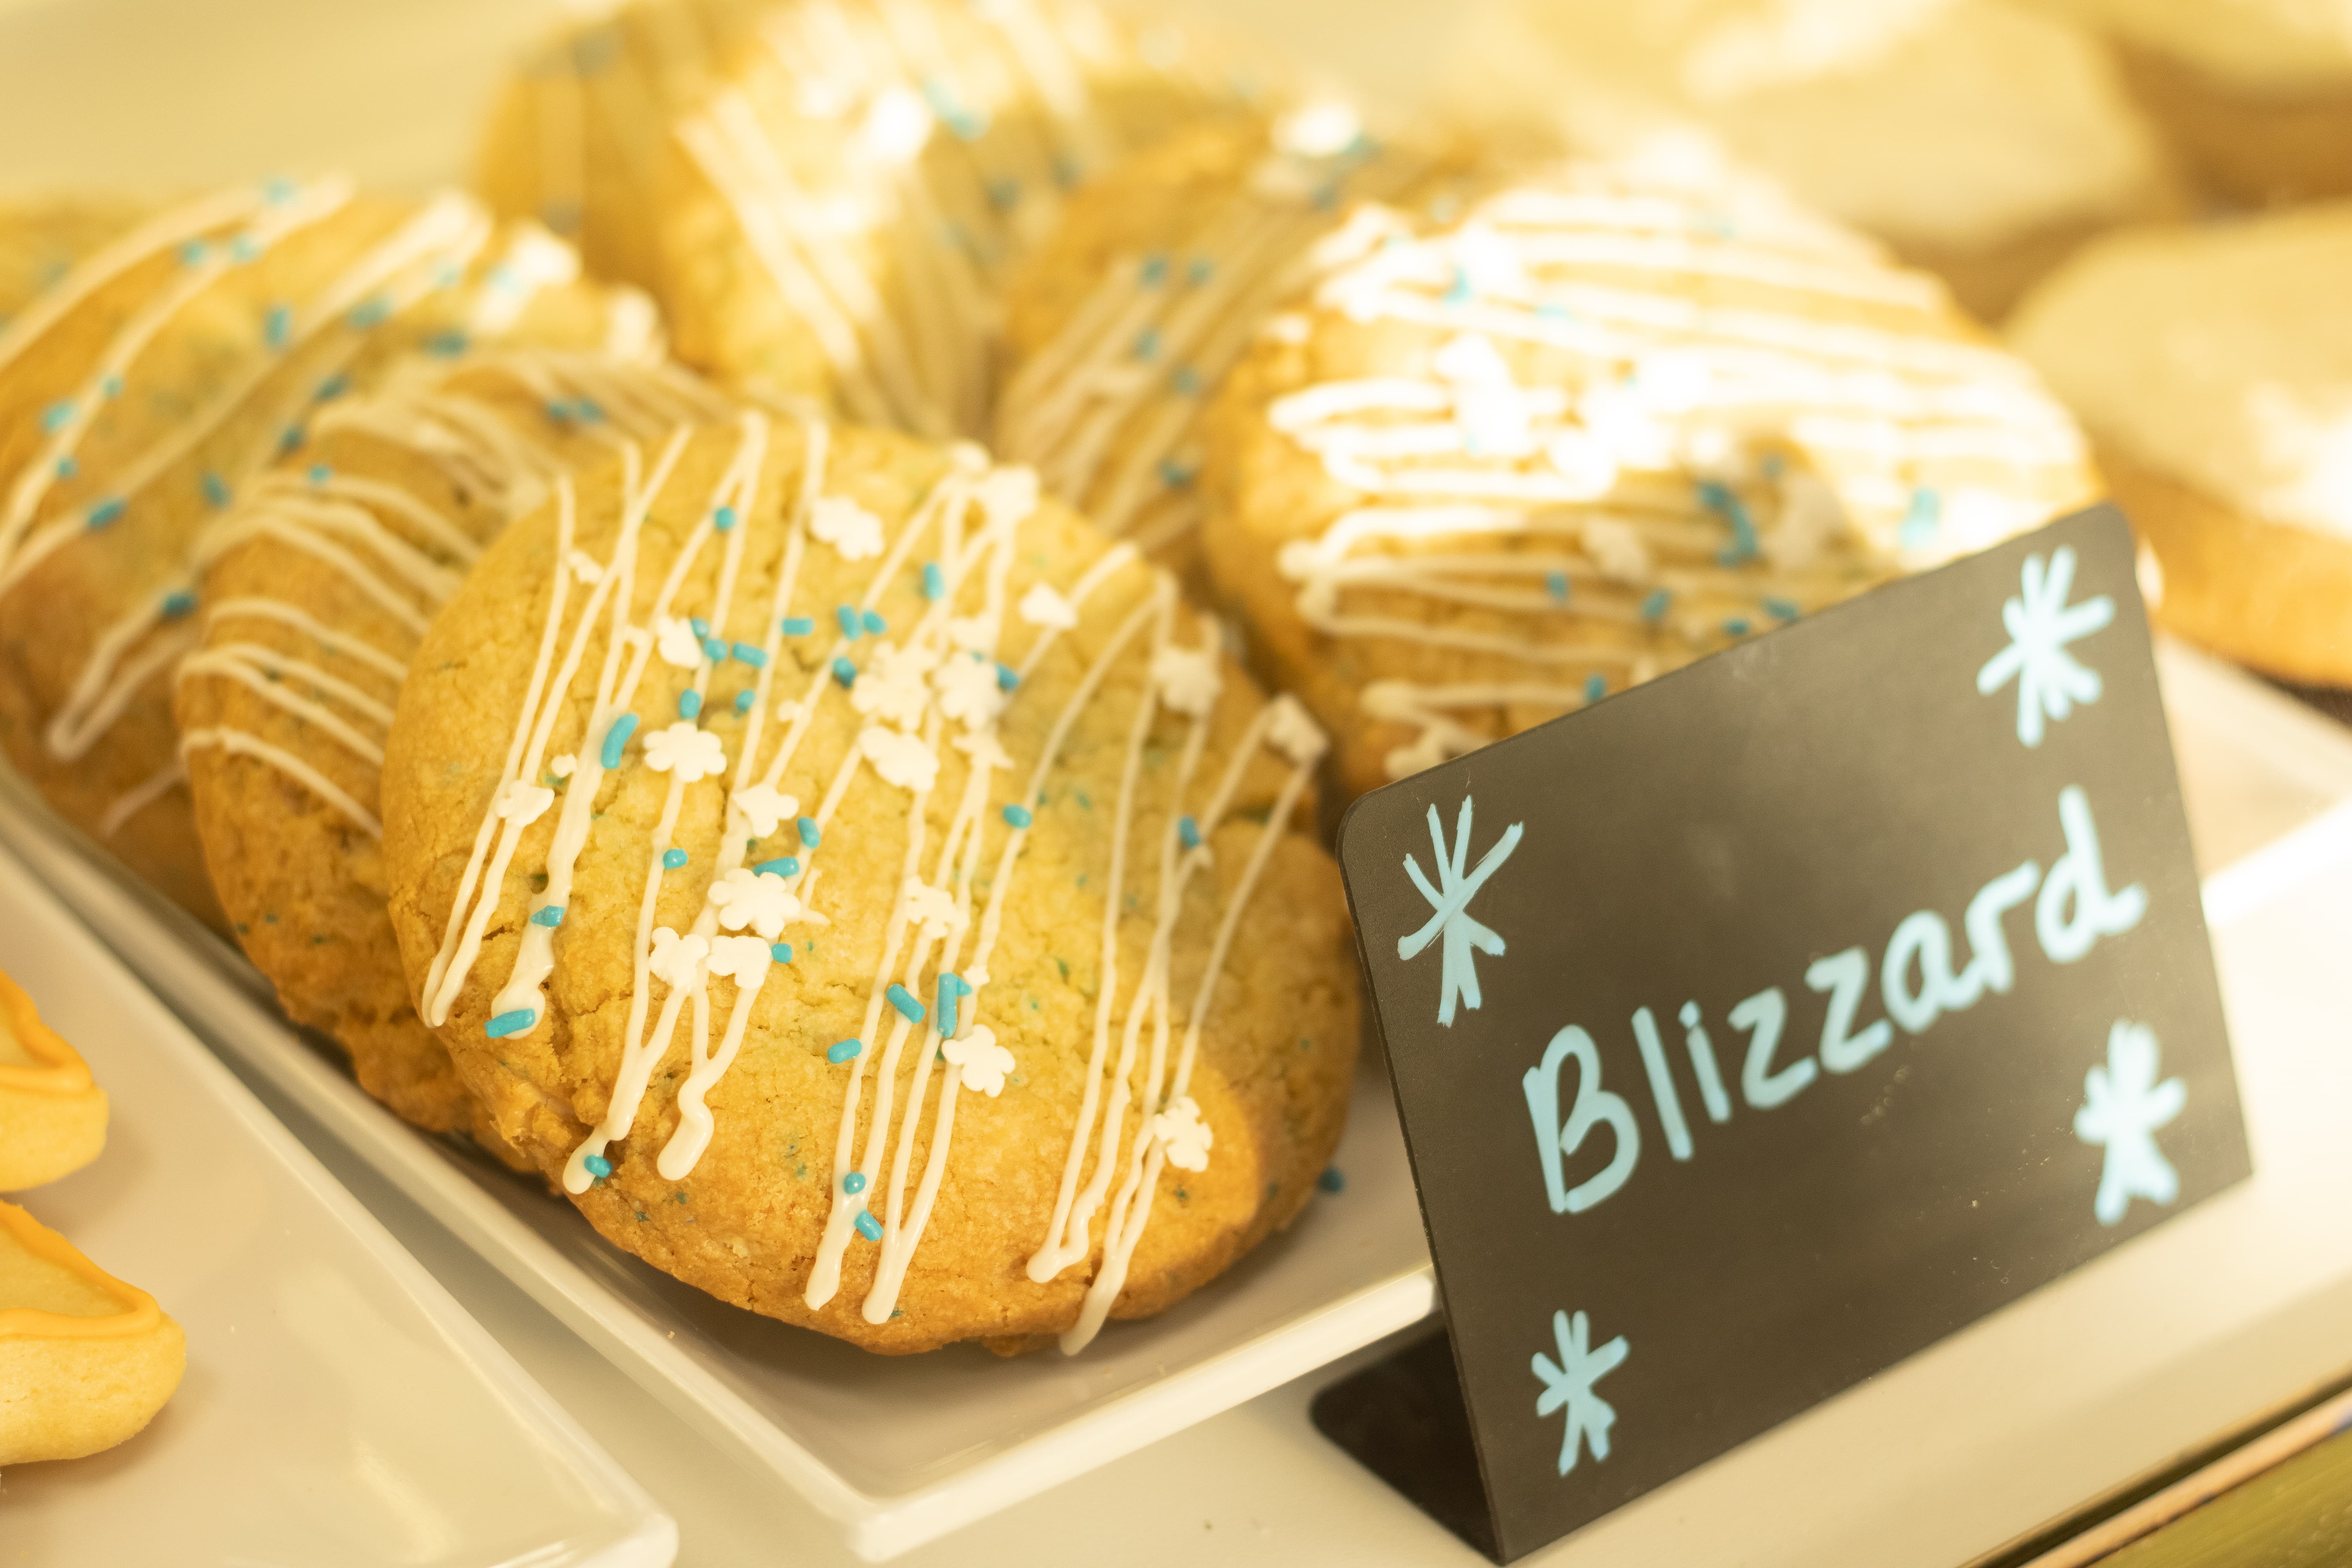 Blizzard cookie by Crave